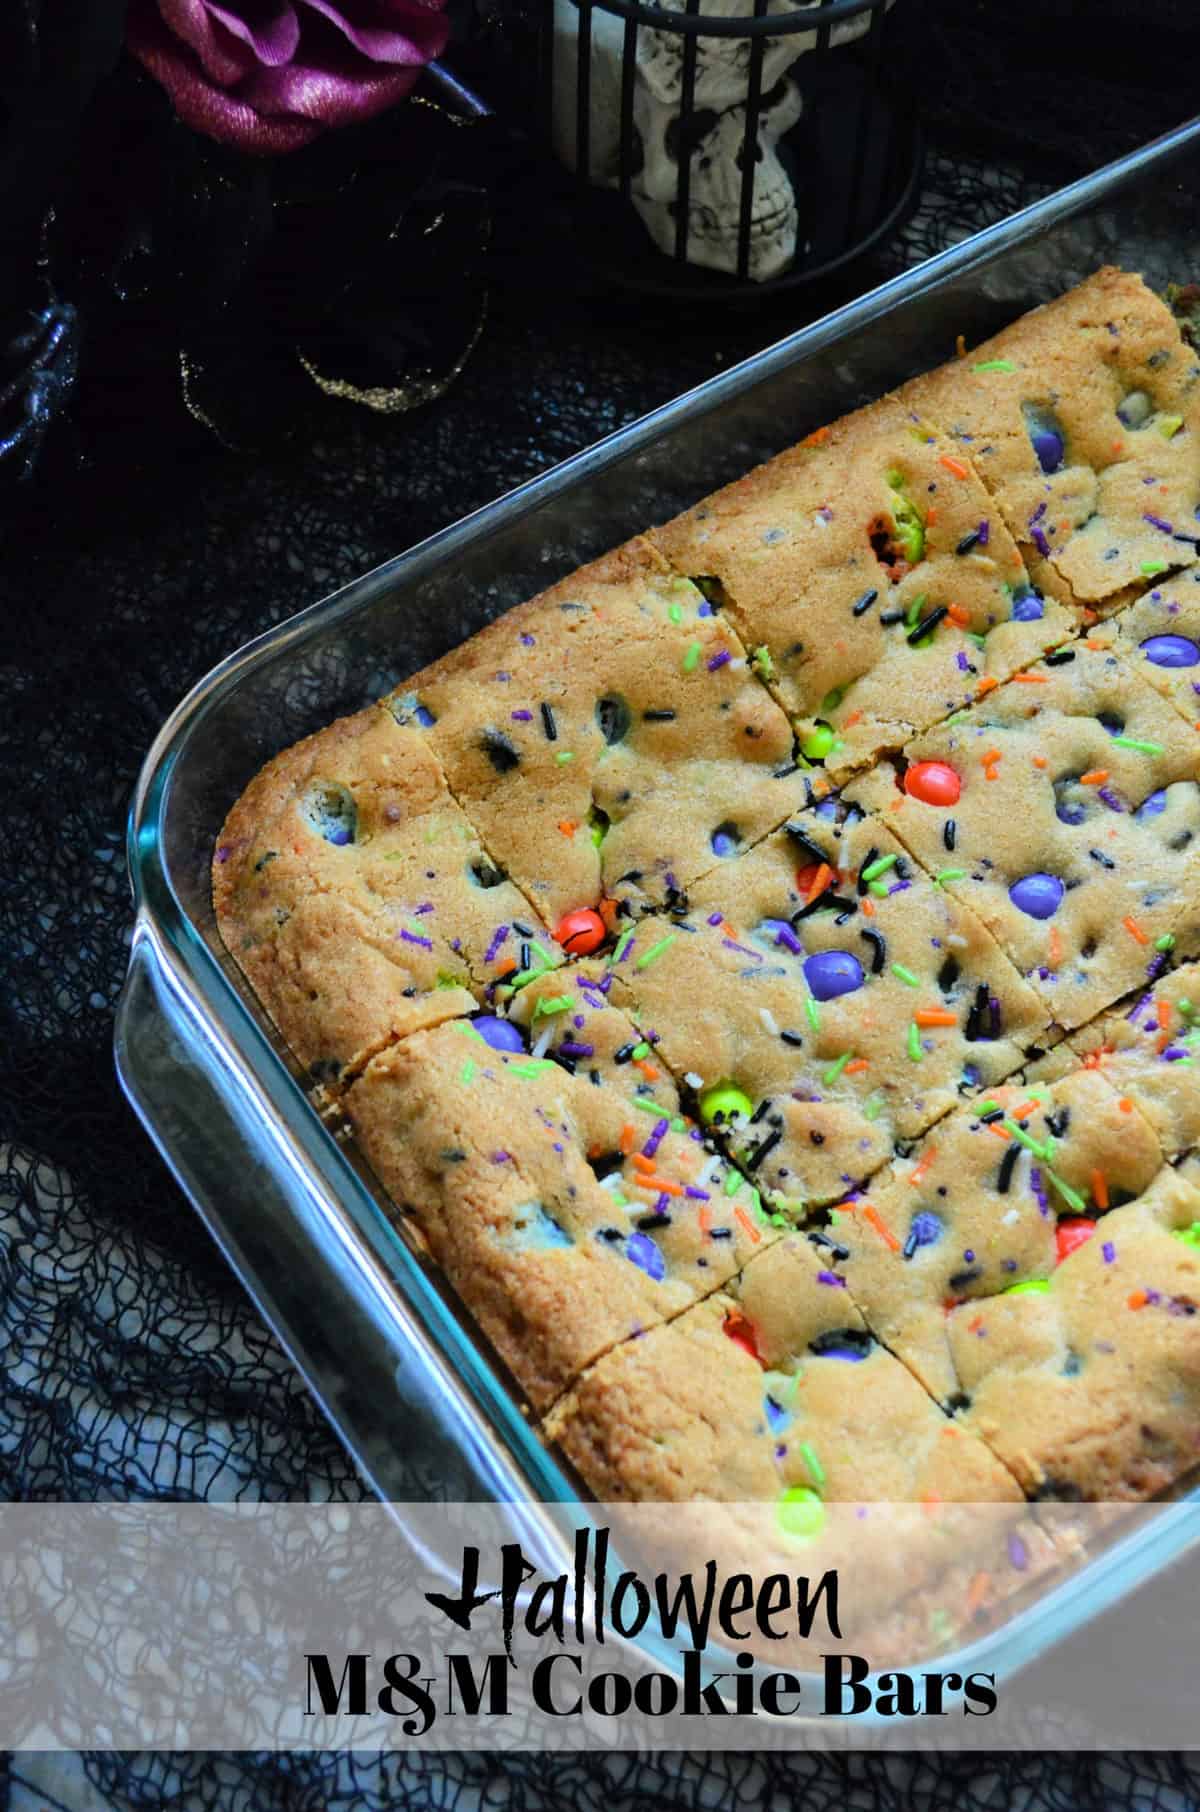 cookie bar in dish made with orange, purple, and green M&Ms and sprinkles with title text.